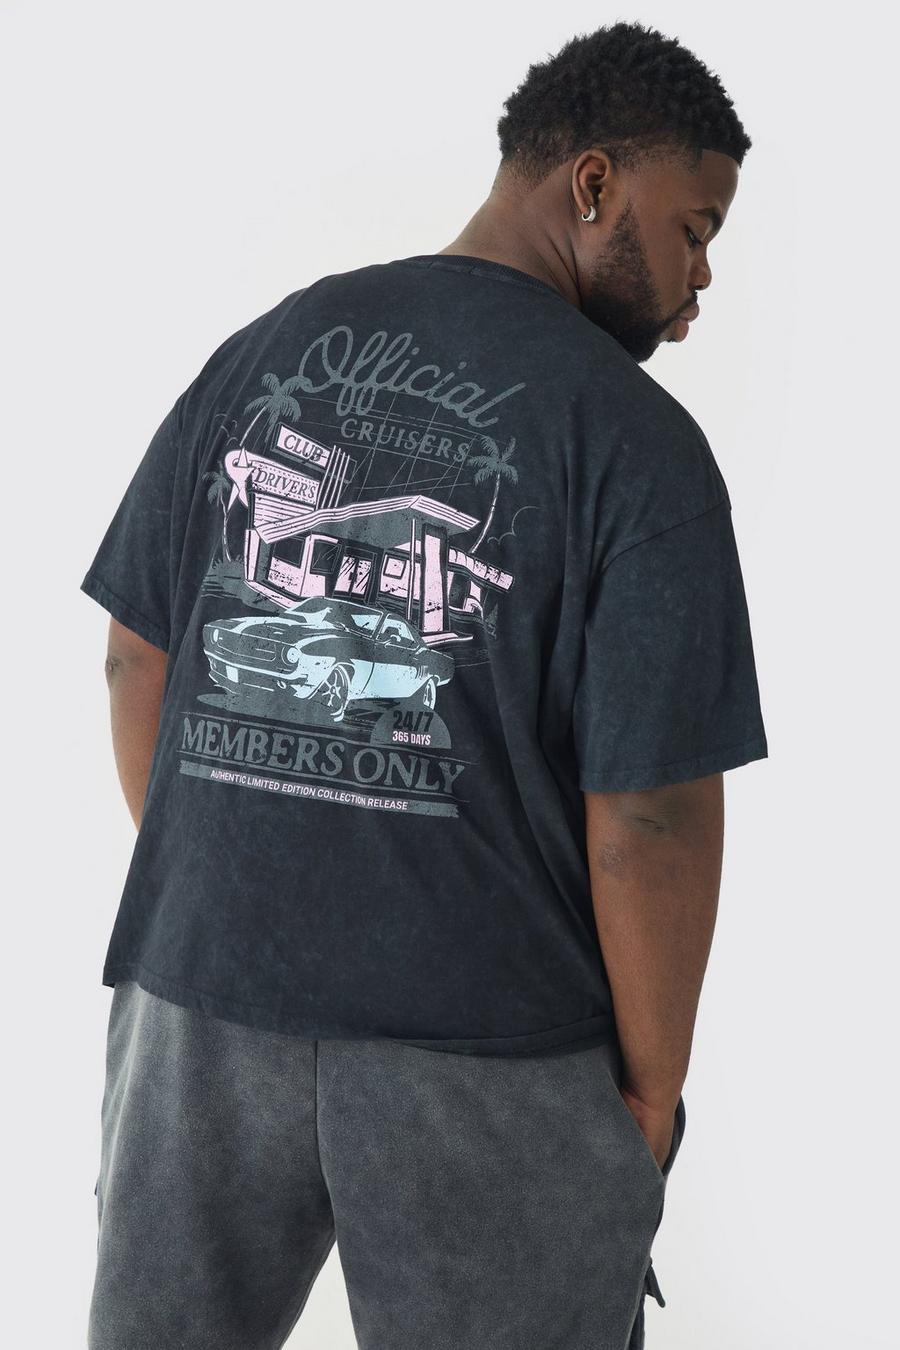 Plus Members Only Racer Back Print T-shirt In Acid Wash Grey